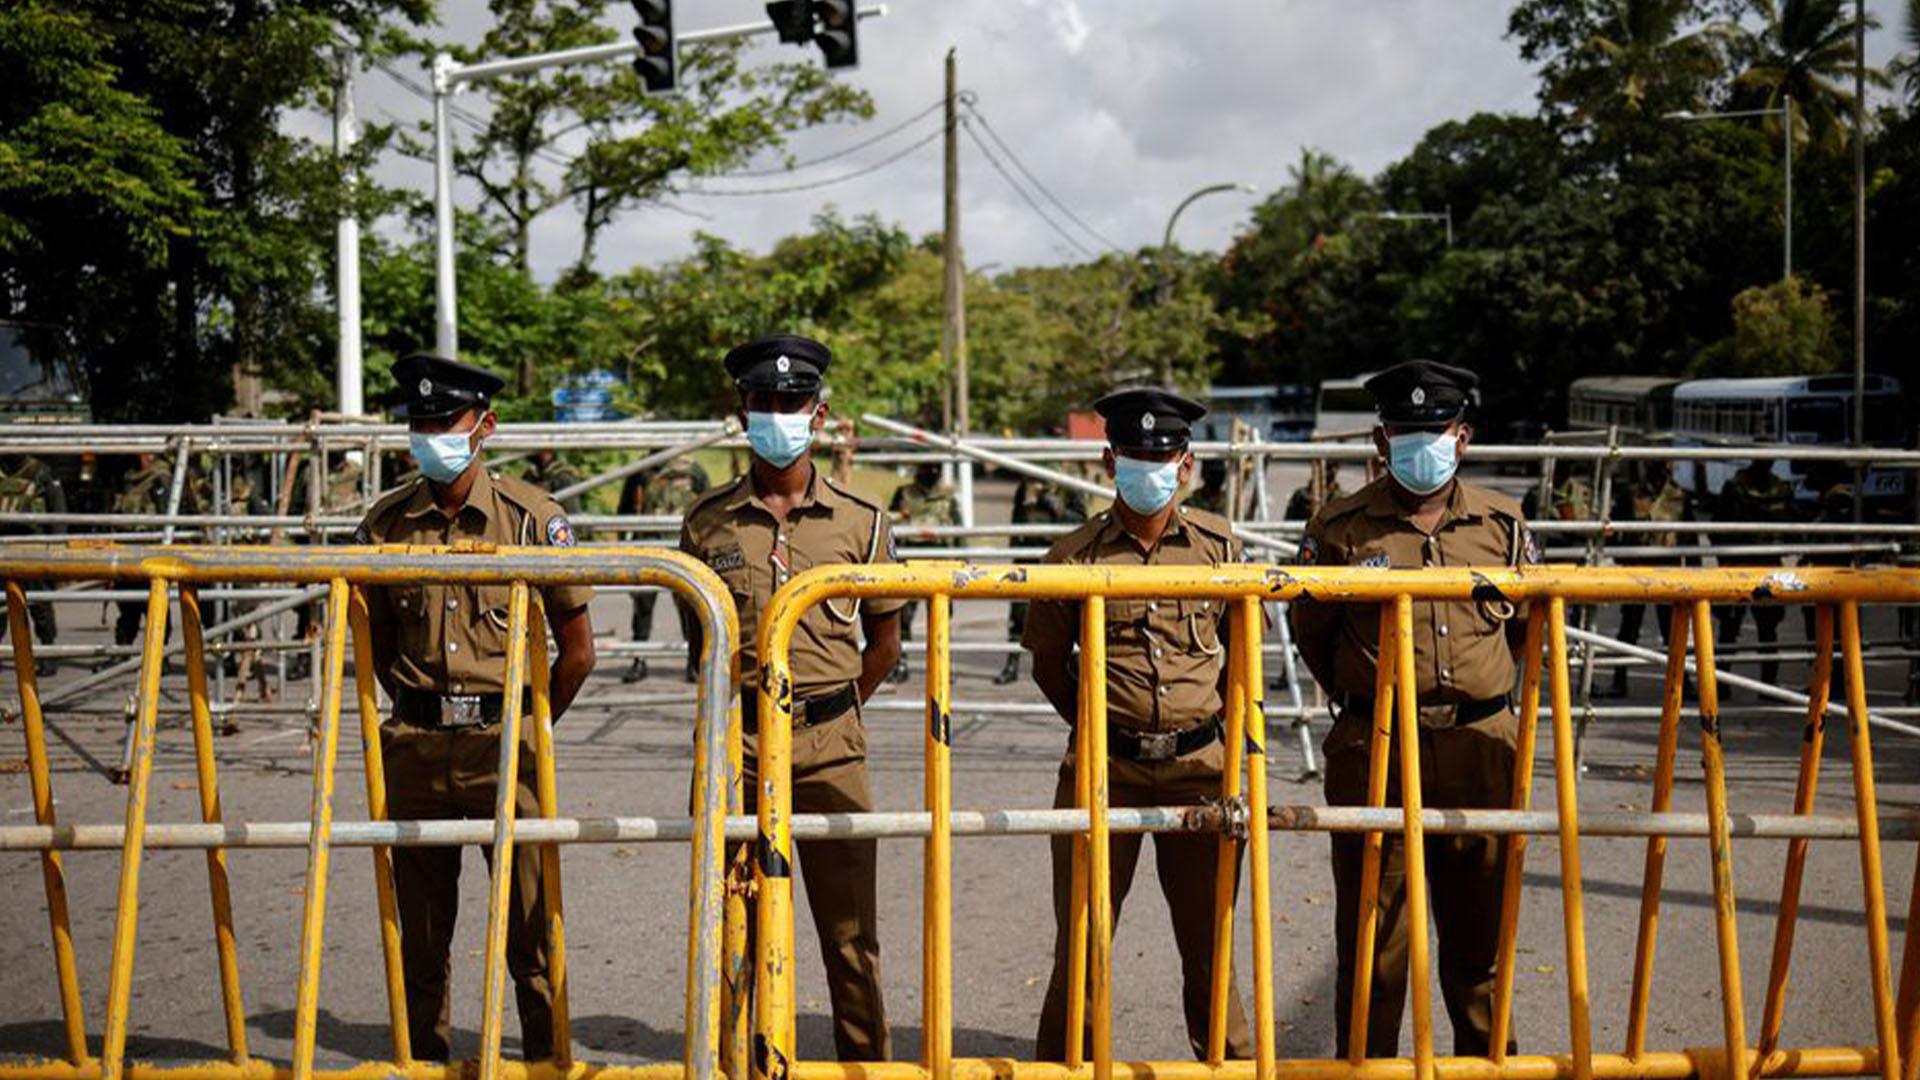  Security personel stand guard outside the Parliament building, amid the country's economic crisis, in Colombo, Sri Lanka July 16, 2022. REUTERS/Adnan Abidi